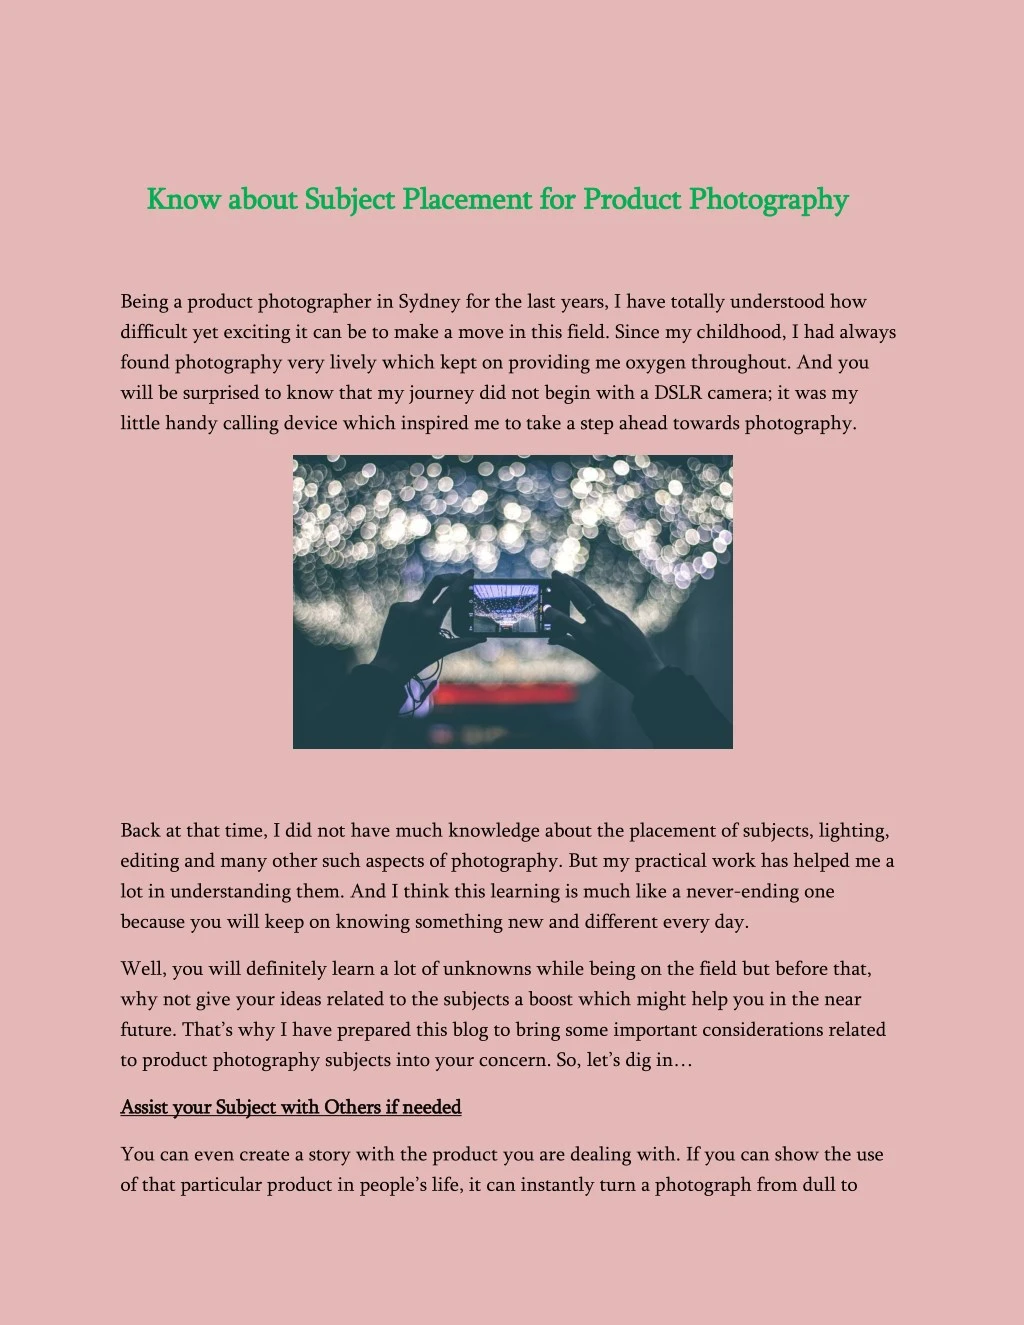 know about subject placement for product